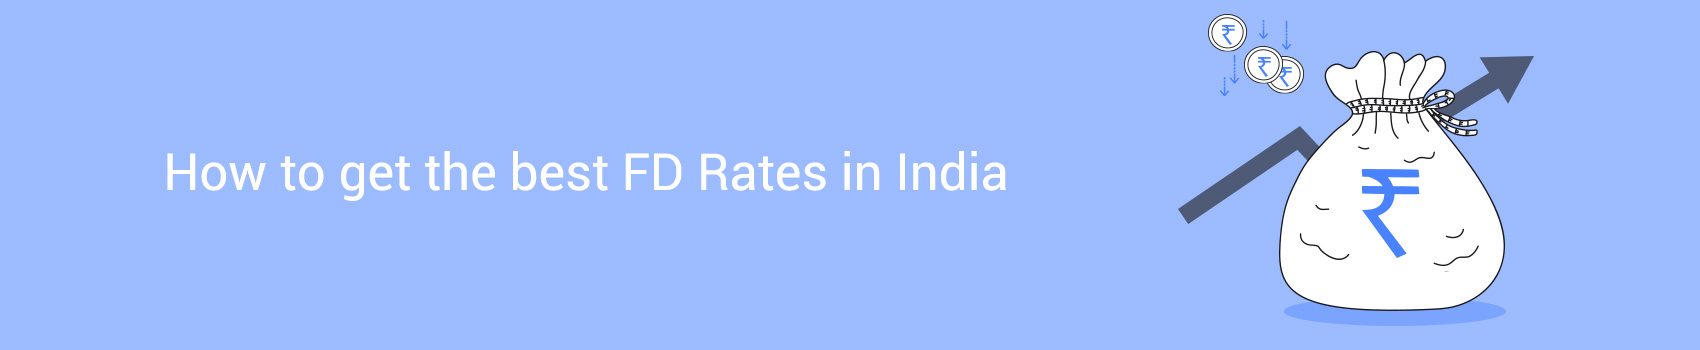 Ways to get the Best FD Rates in India